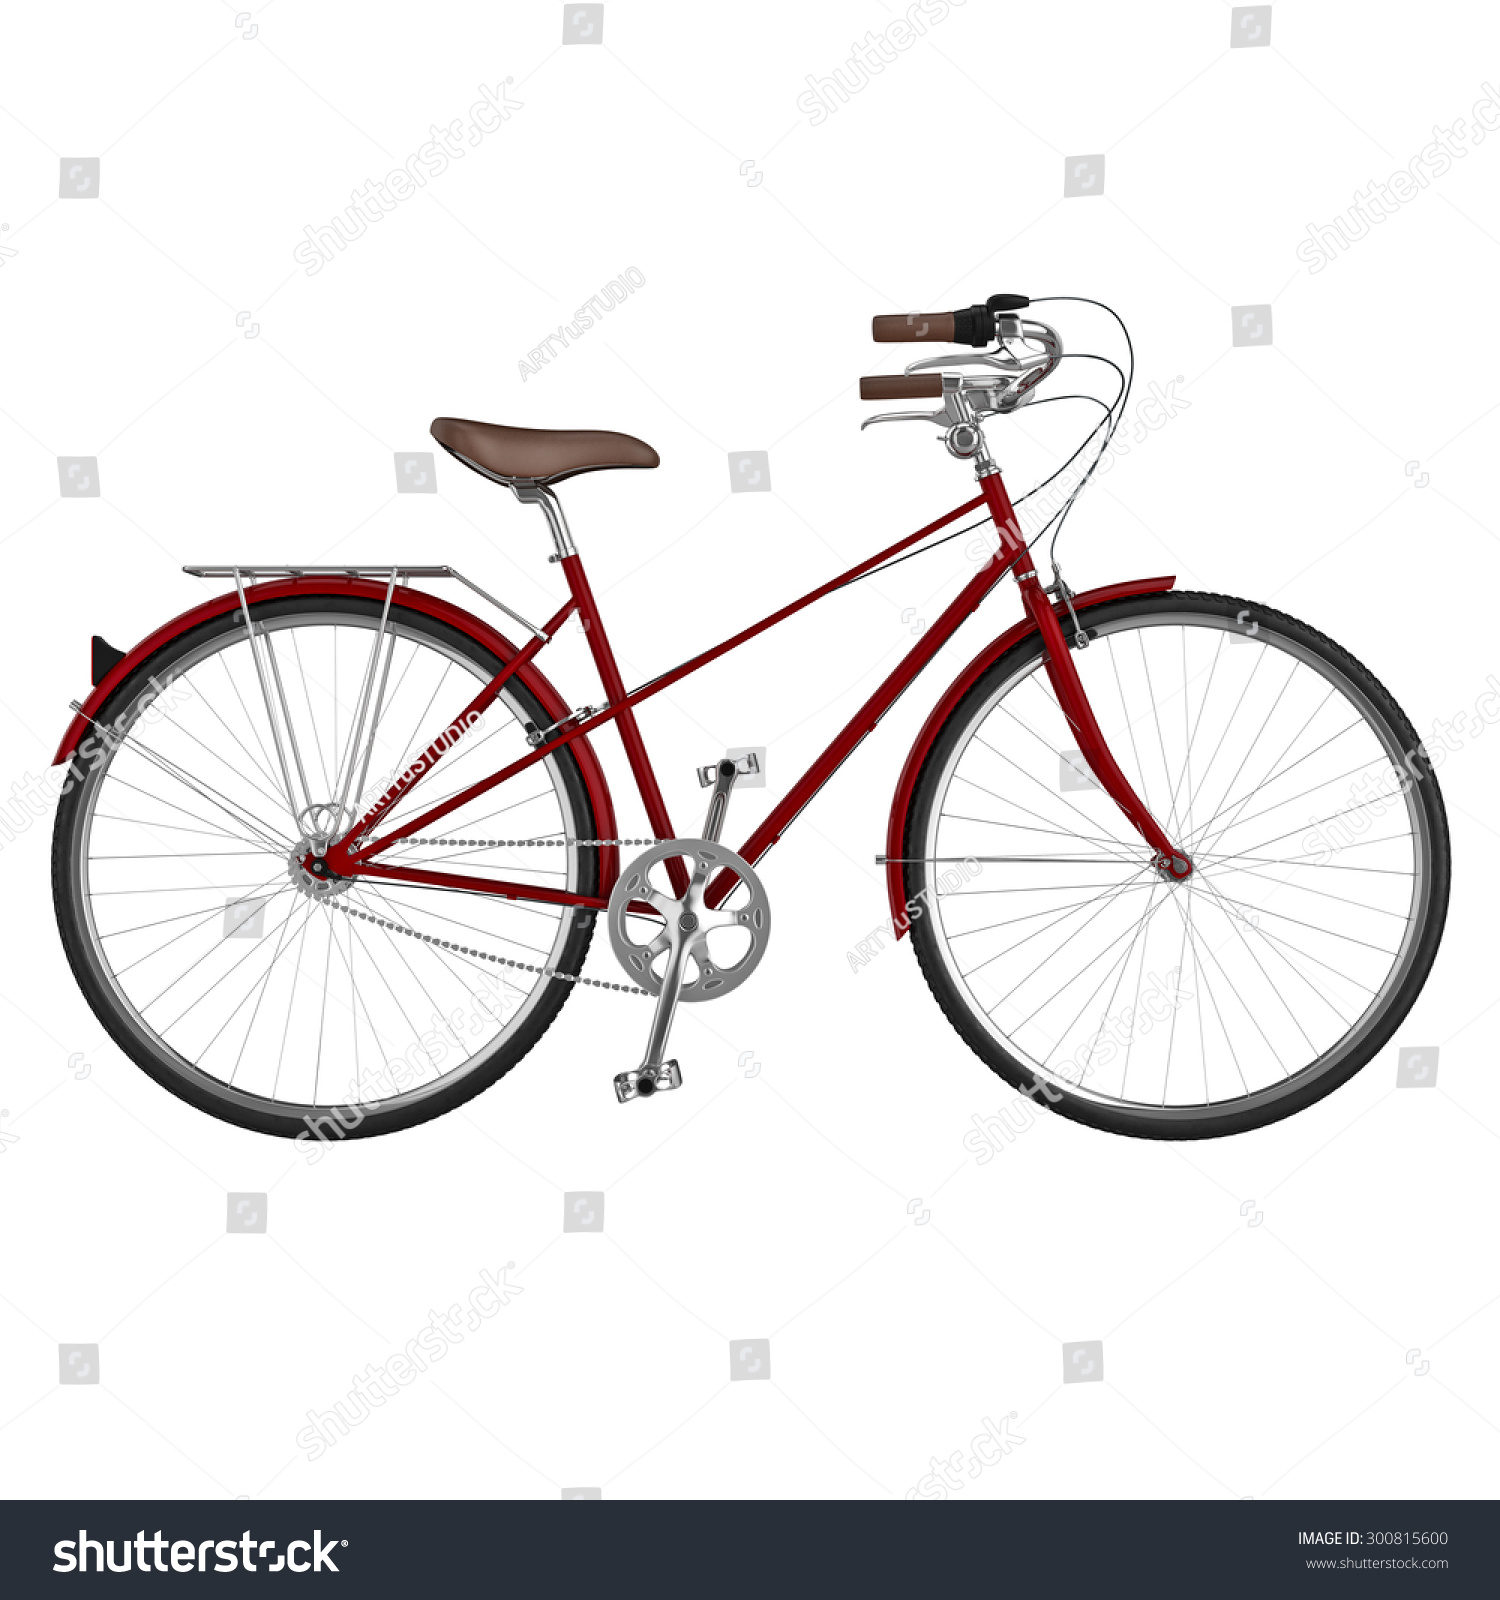 stock photo side view of classic bicycle with chrome detail some of the elements d graphic object on white 300815600